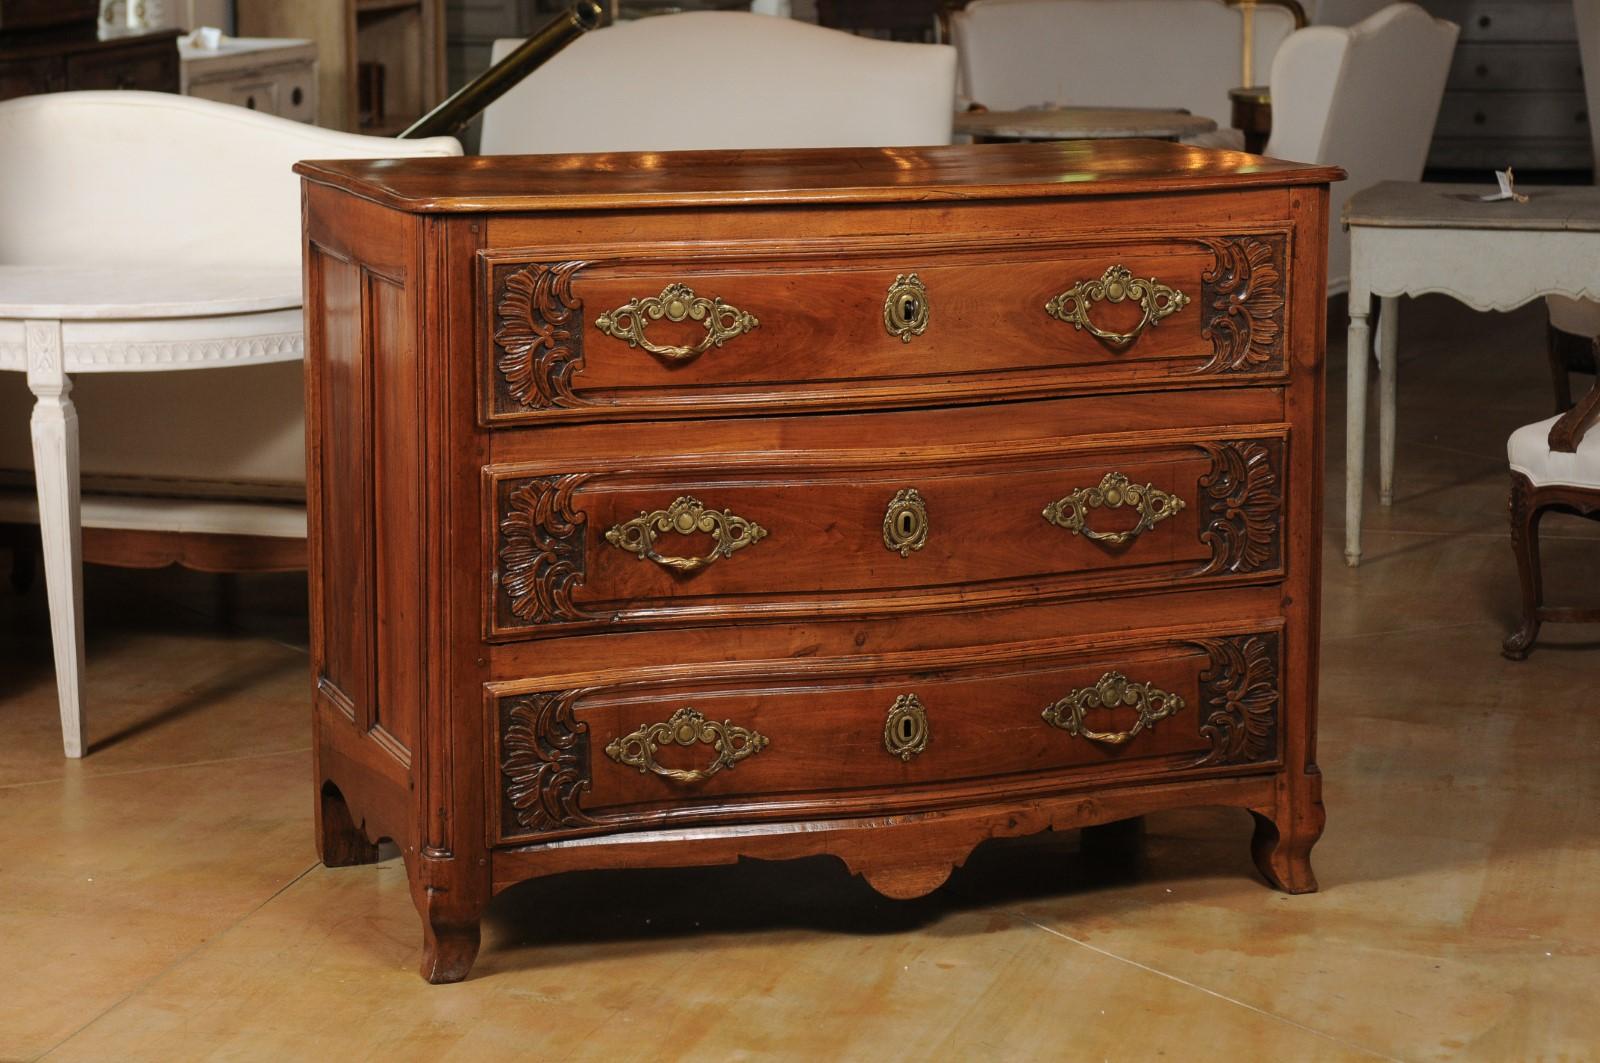 A French Louis XV period early 18th century walnut three-drawer commode from Lyon, with carved foliage and serpentine front. Crafted in Lyon during the reign of King Louis XV nicknamed the Bien-Aimé (the Beloved), this walnut commode features a